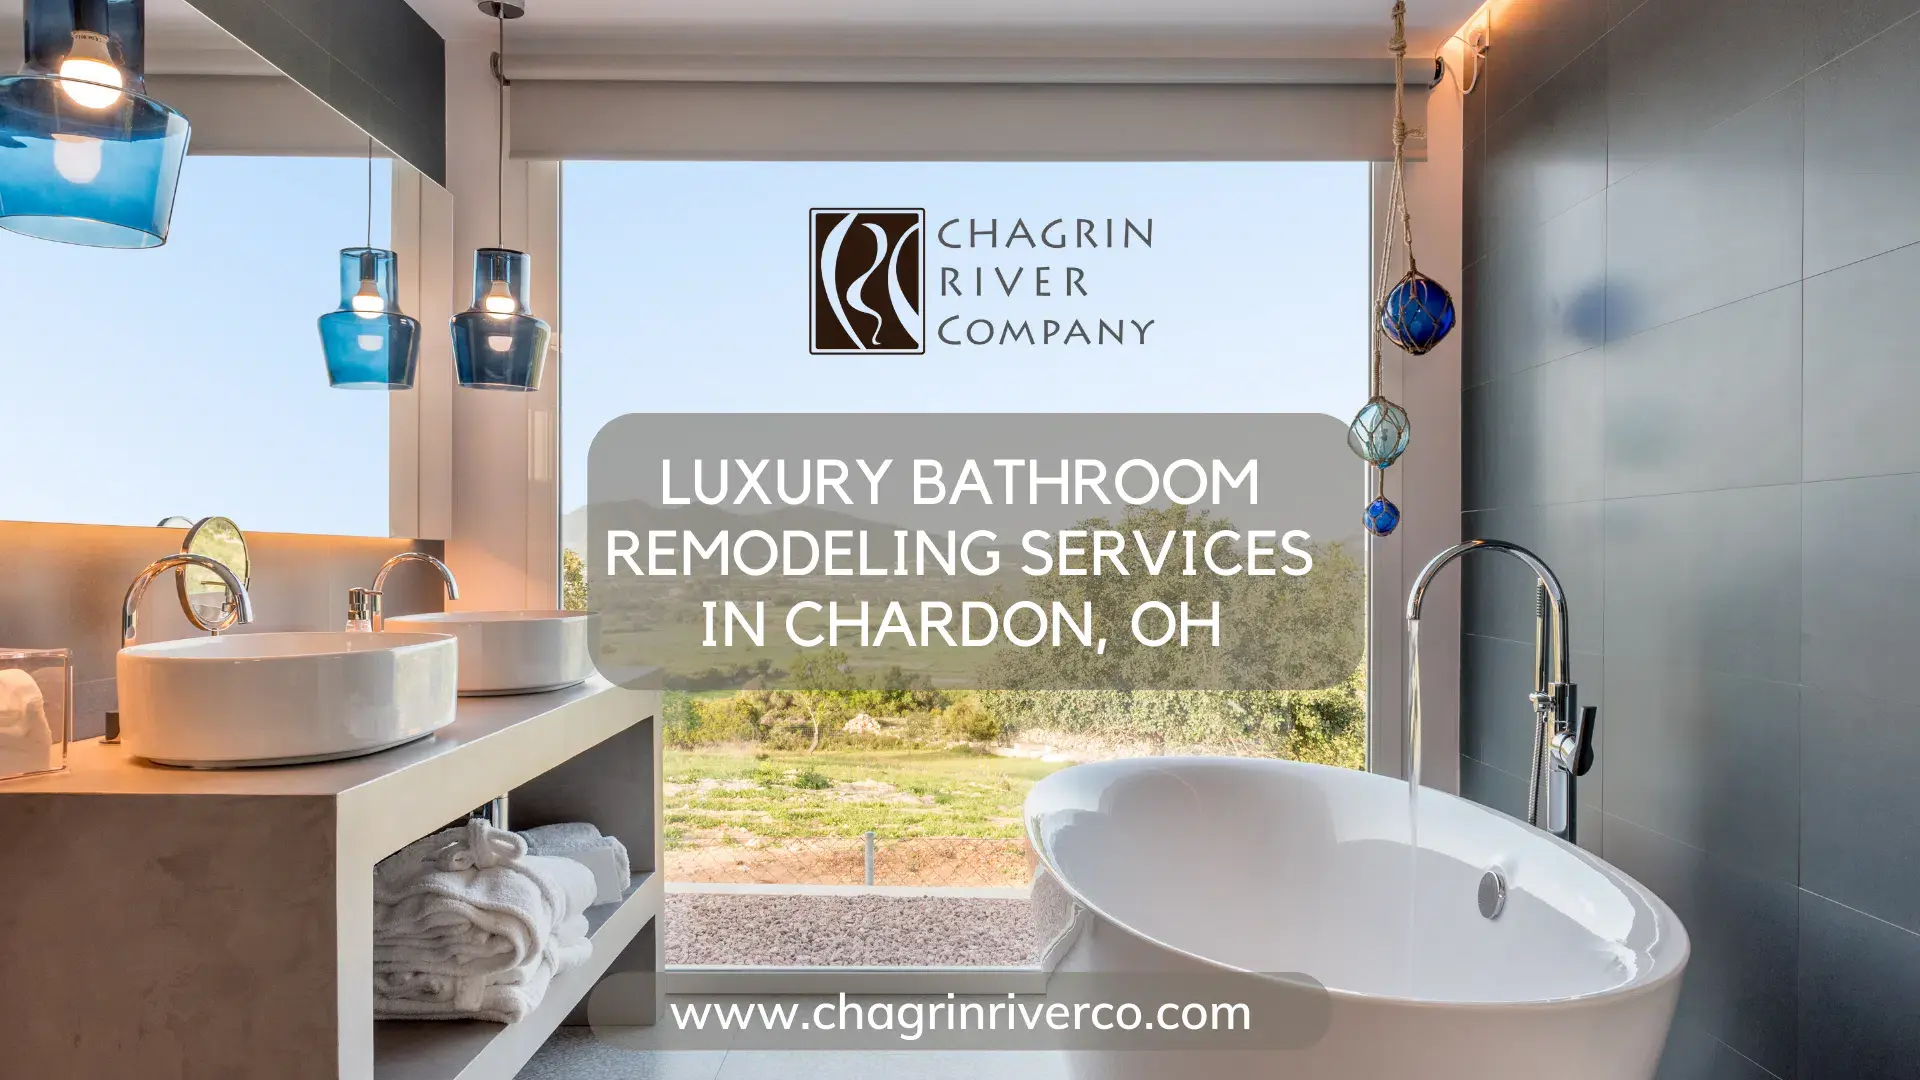 Luxury Bathroom Remodeling Services in Chardon, OH